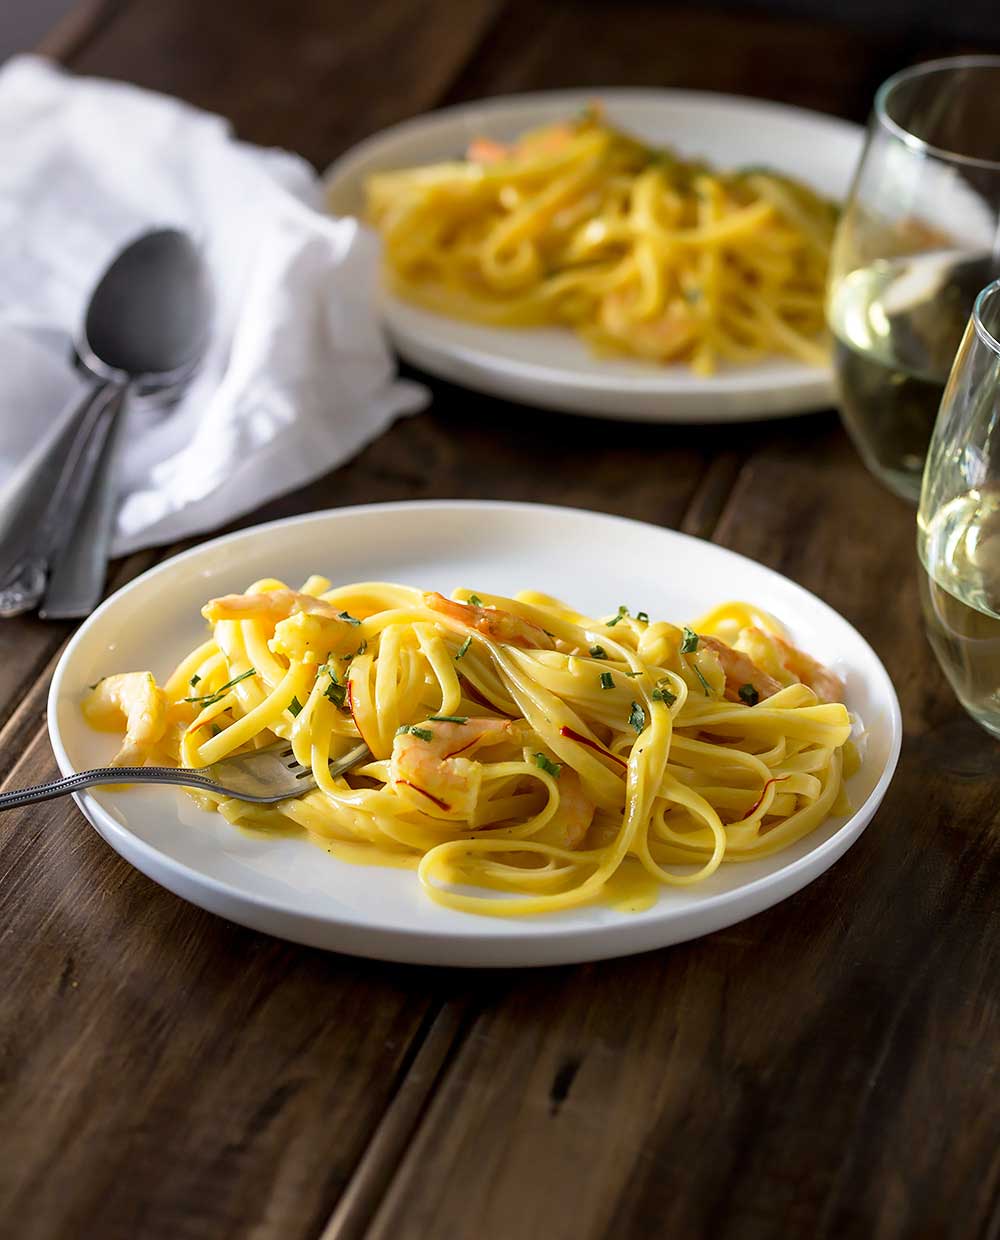 Creamy, rich and luxurious! This Saffron and Prawn linguine is quick and easy, making it perfect for busy nights but also special enough for entertaining.